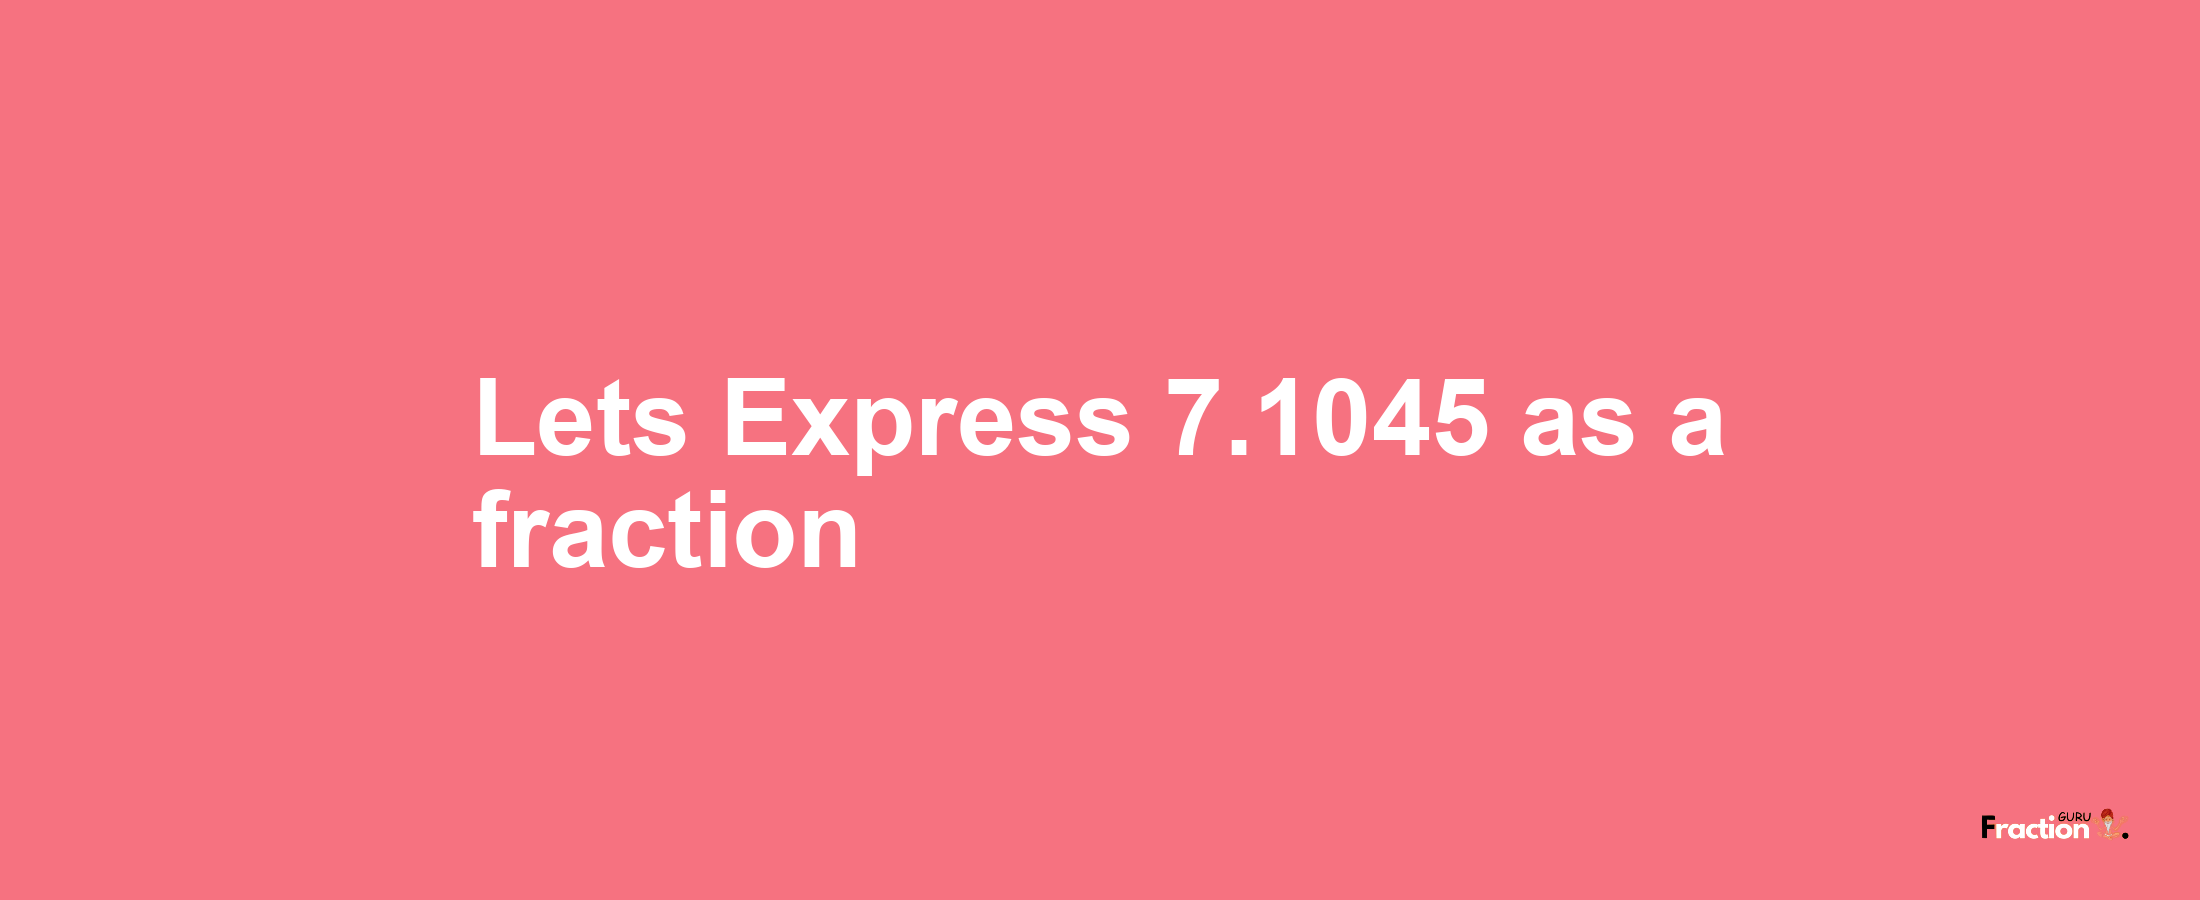 Lets Express 7.1045 as afraction